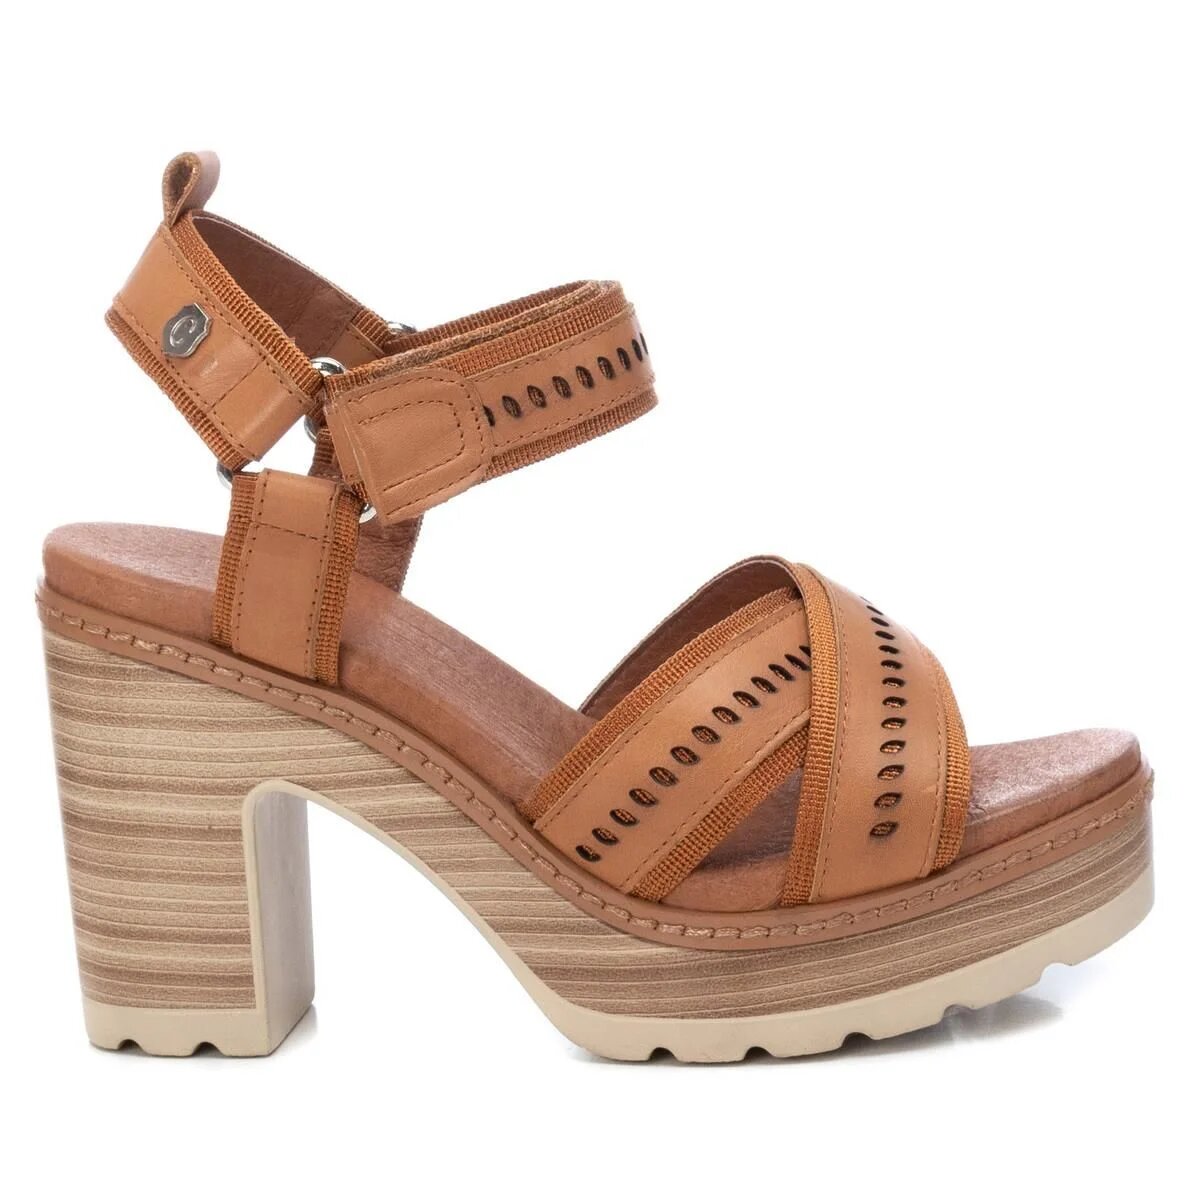 Brown leather square-heeled sandals by Carmela